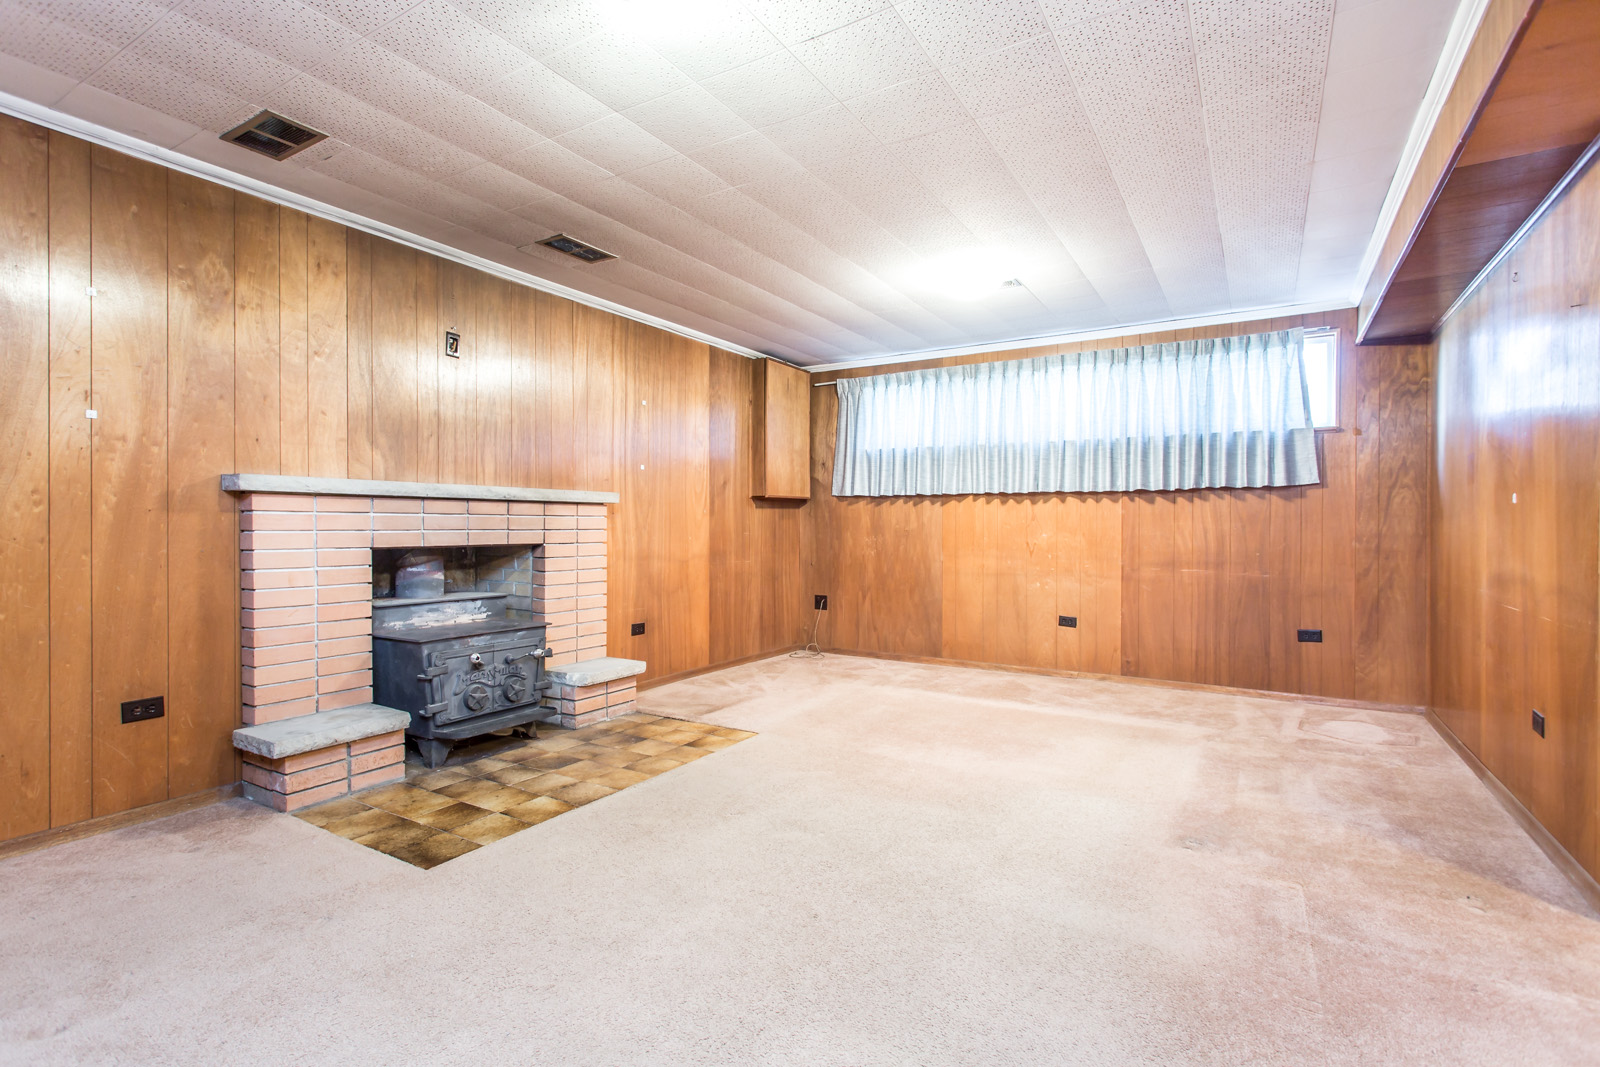 Rec room with carpet and furnace. Almost all of it is covered in carpet, while the walls have wooden panels.